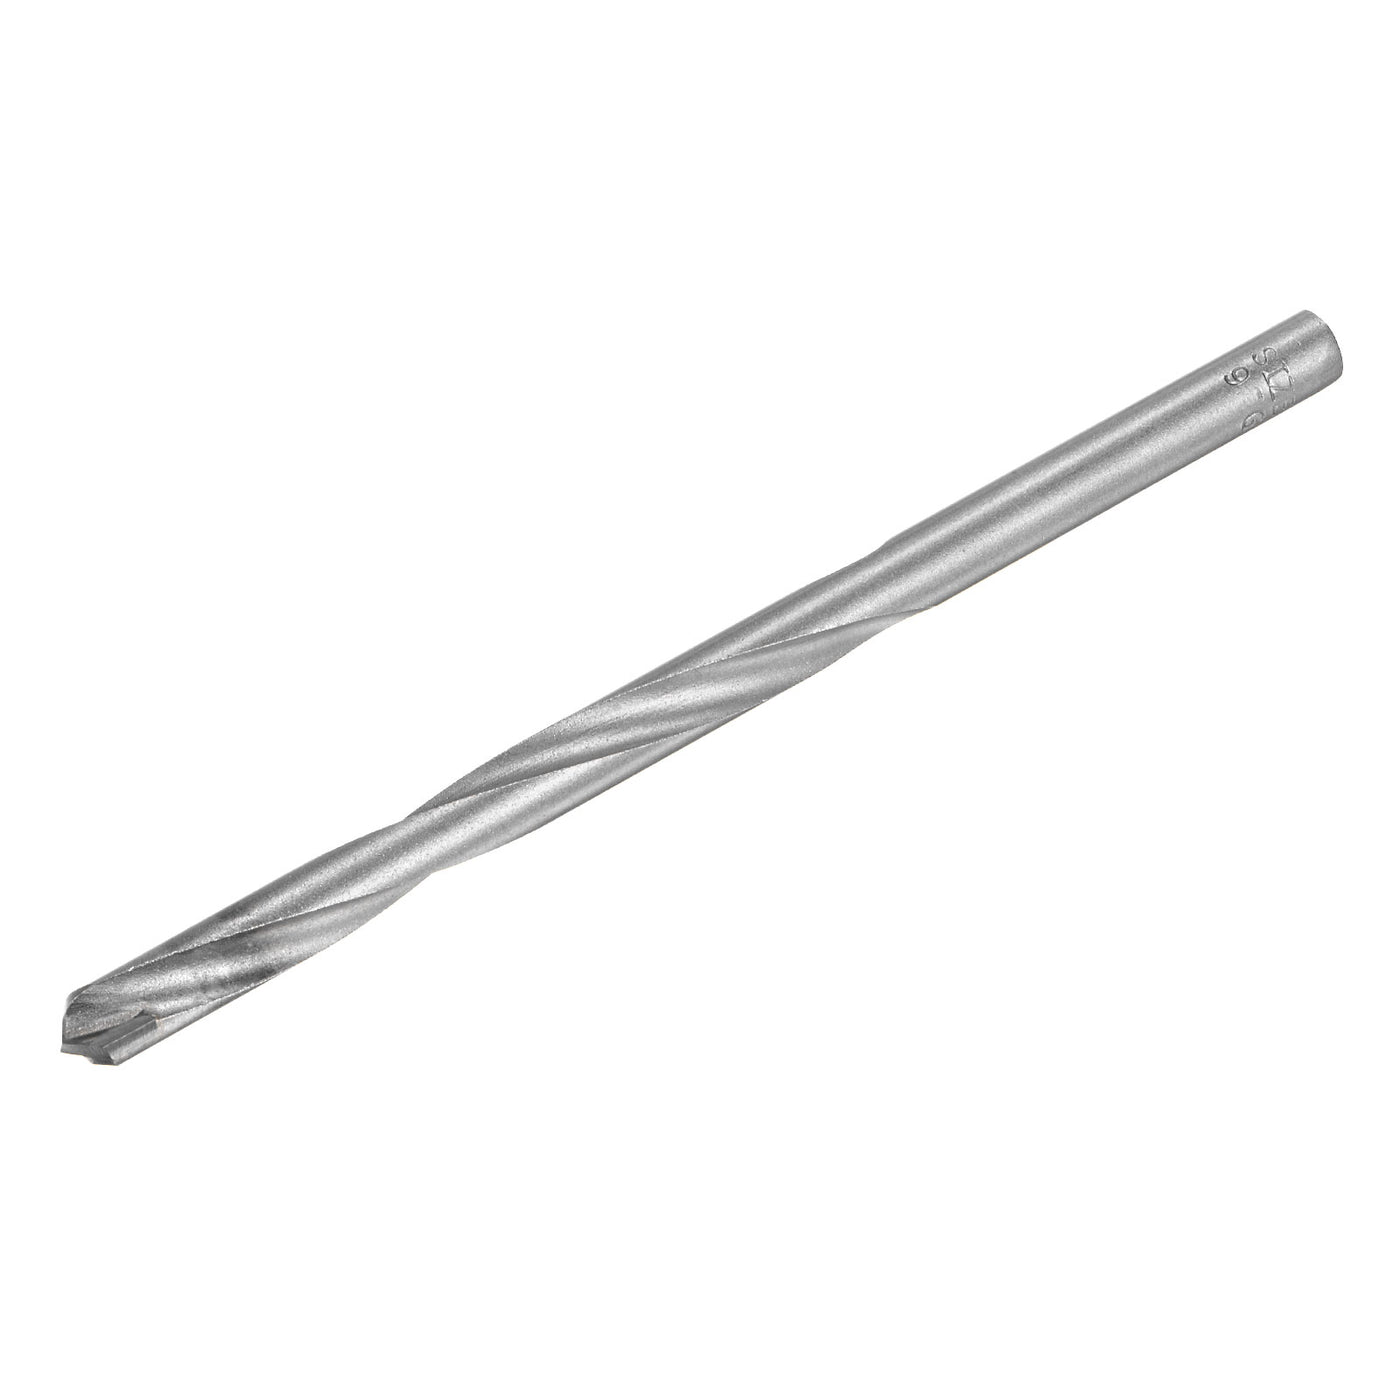 uxcell Uxcell 9mm Cutting Dia Round Shank Cemented Carbide Twist Drill Bit, 160mm Length